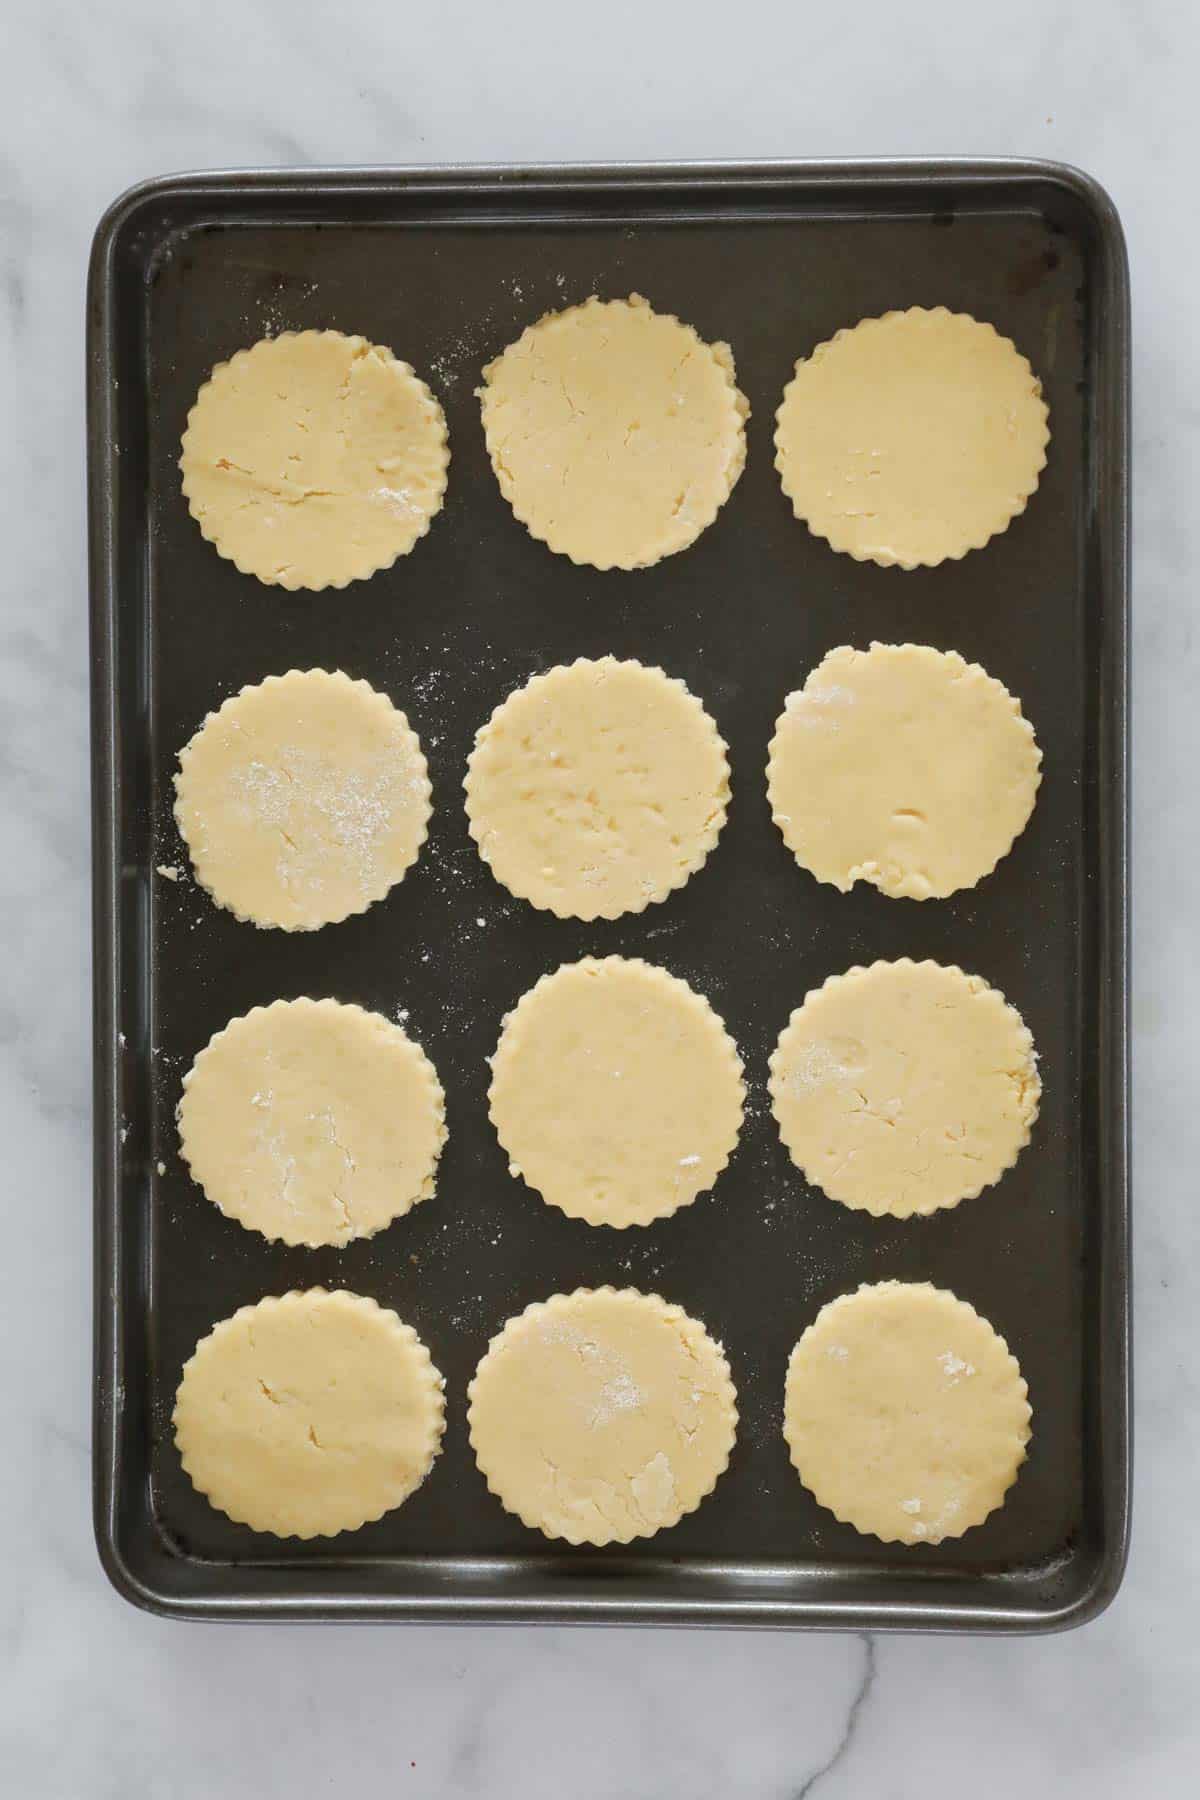 Round cookies on a baking tray.